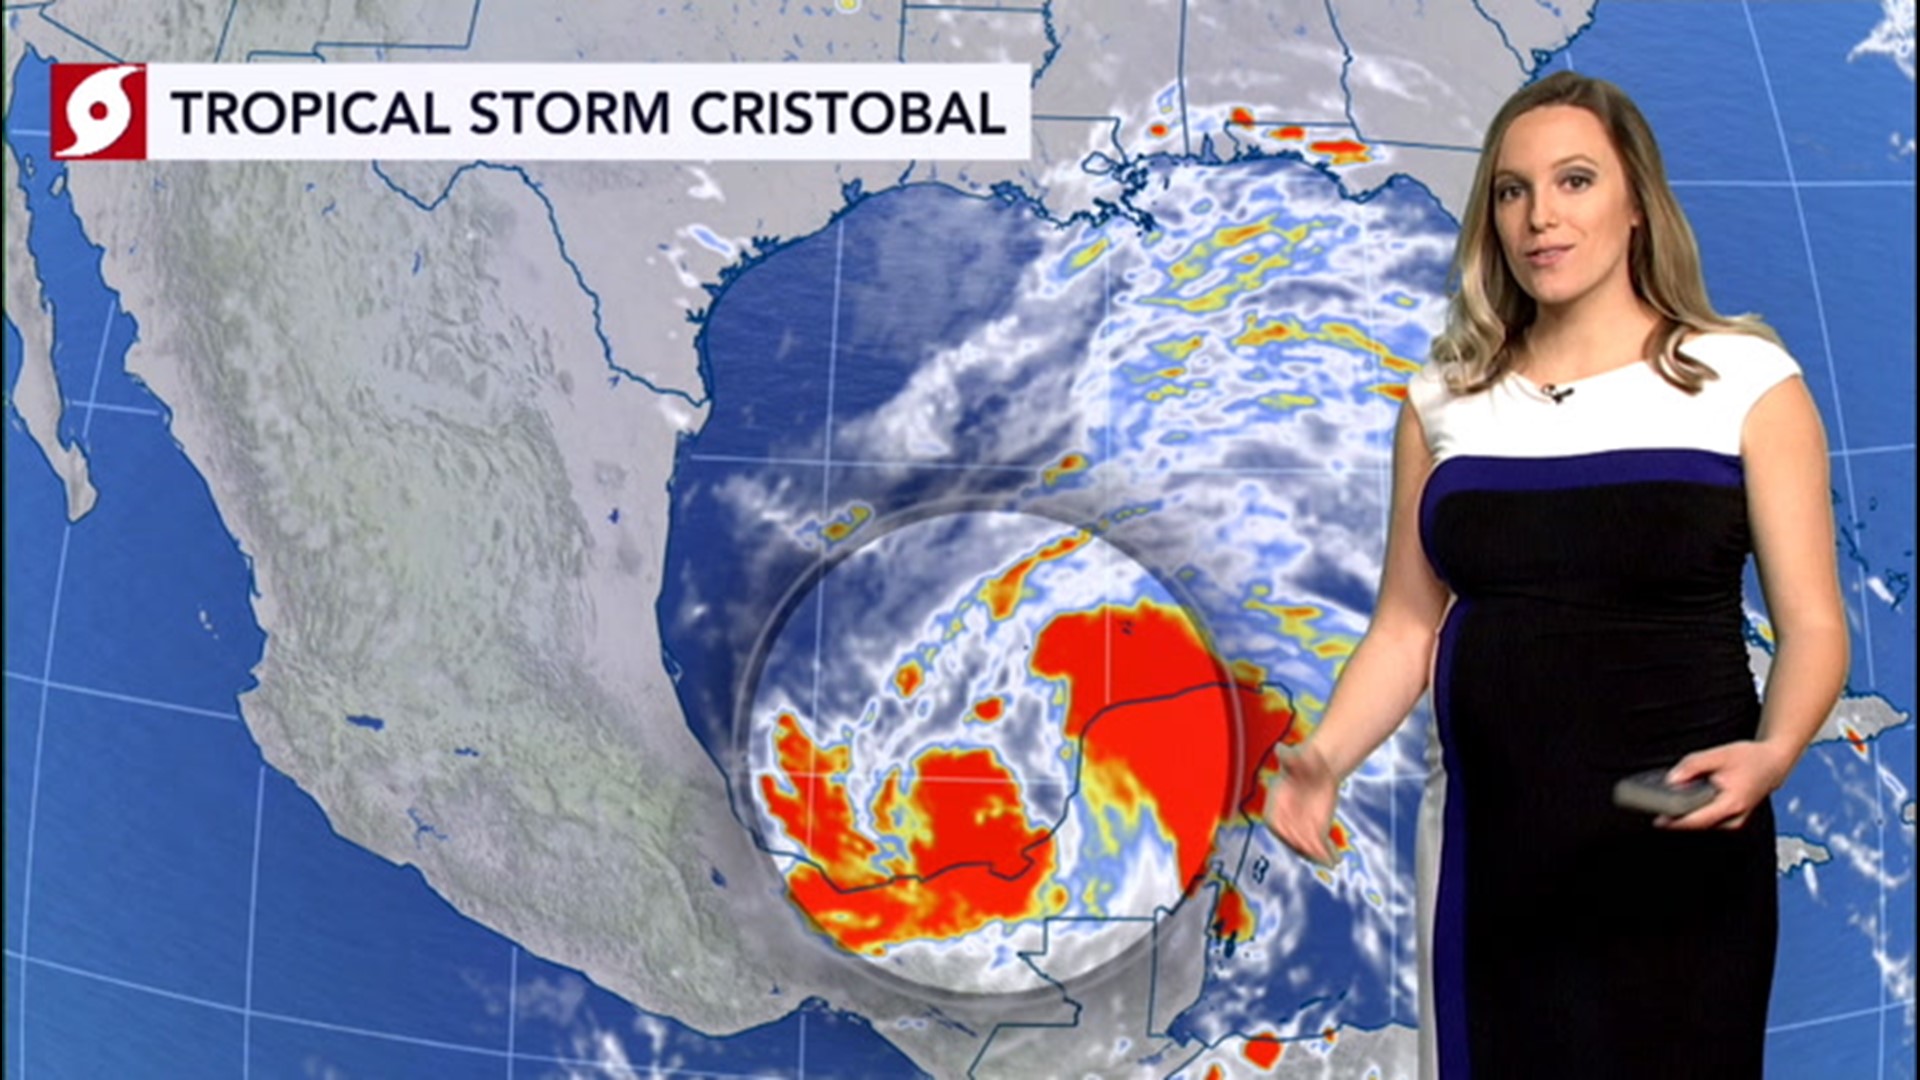 Cristobal will continue to drench parts of Mexico before it eventually heads for the United States' Gulf Coast.